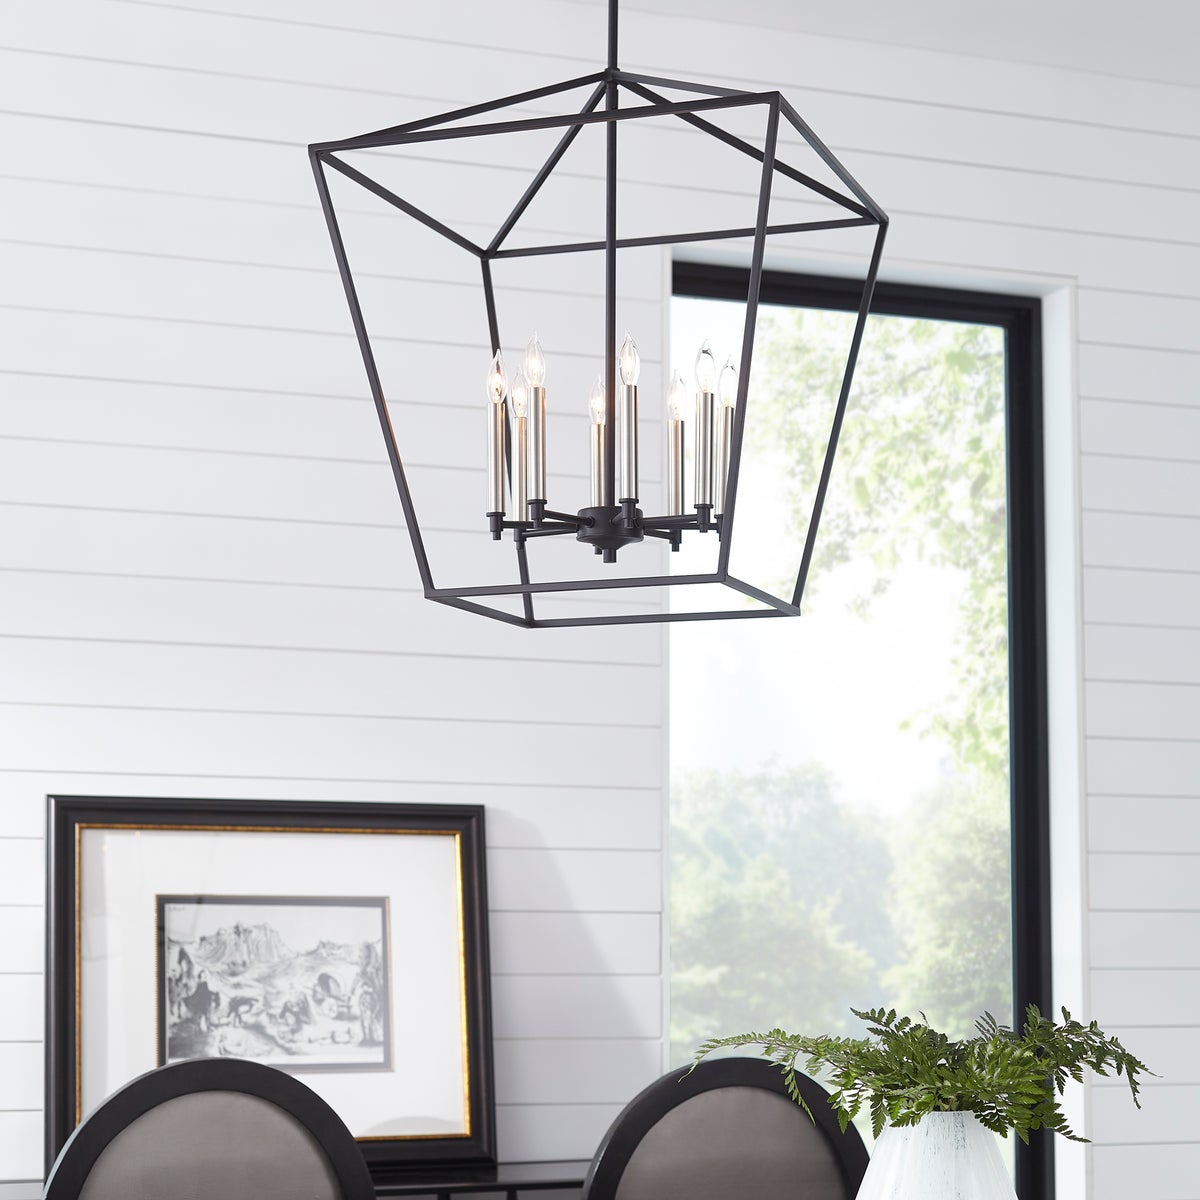 Farmhouse chandelier with open tapered shade and candelabra bulbs. Adds charm to foyer, hallway, or kitchen. Perfect with distressed woods and whitewashed floors.